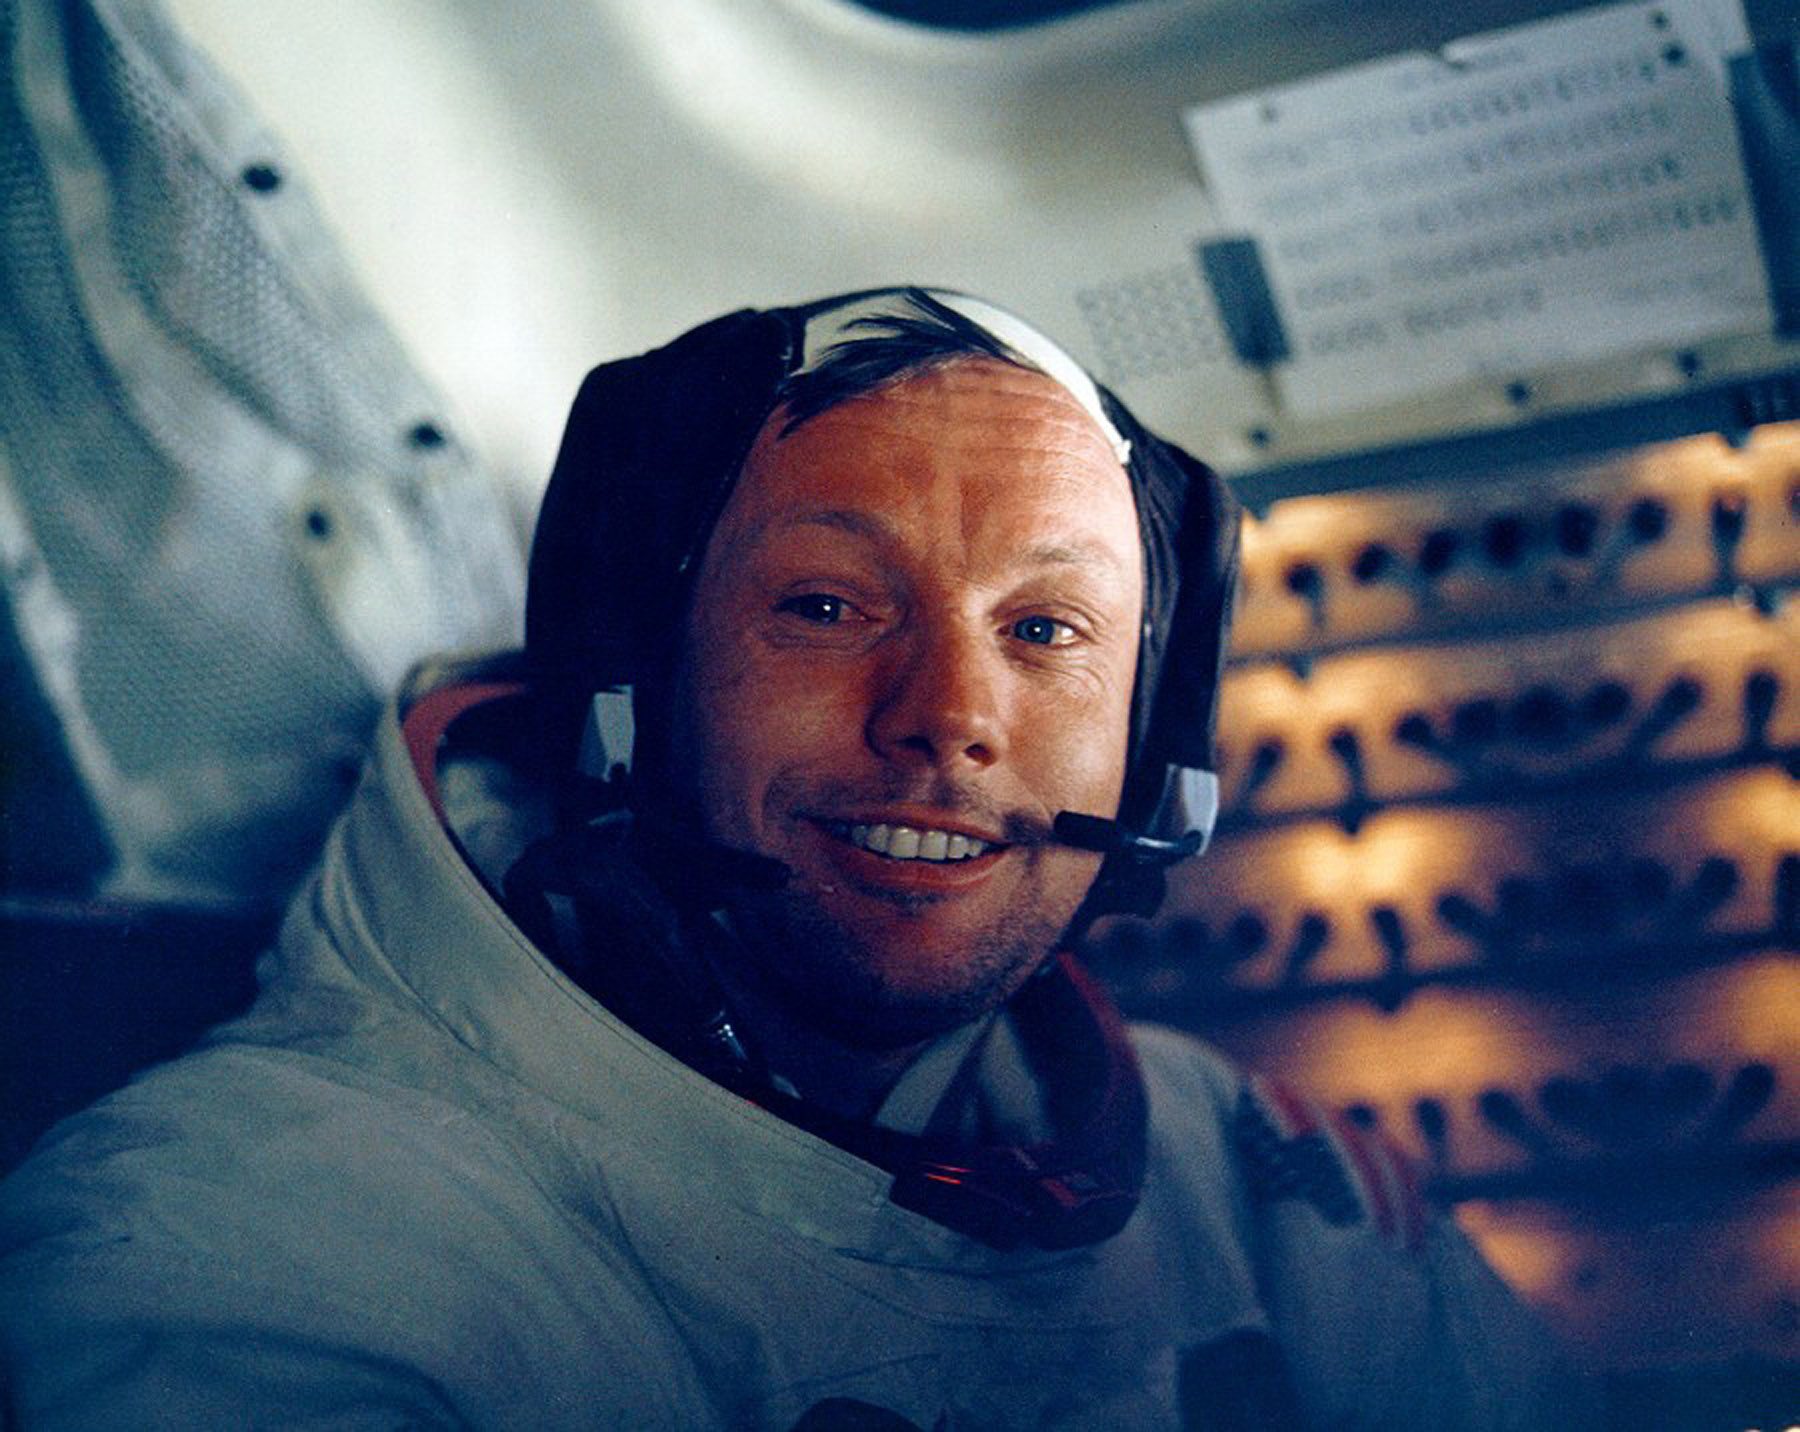 Astronaut Neil Armstrong smiles inside the Lunar Module on July 20, 1969. (NASA/Getty Images)